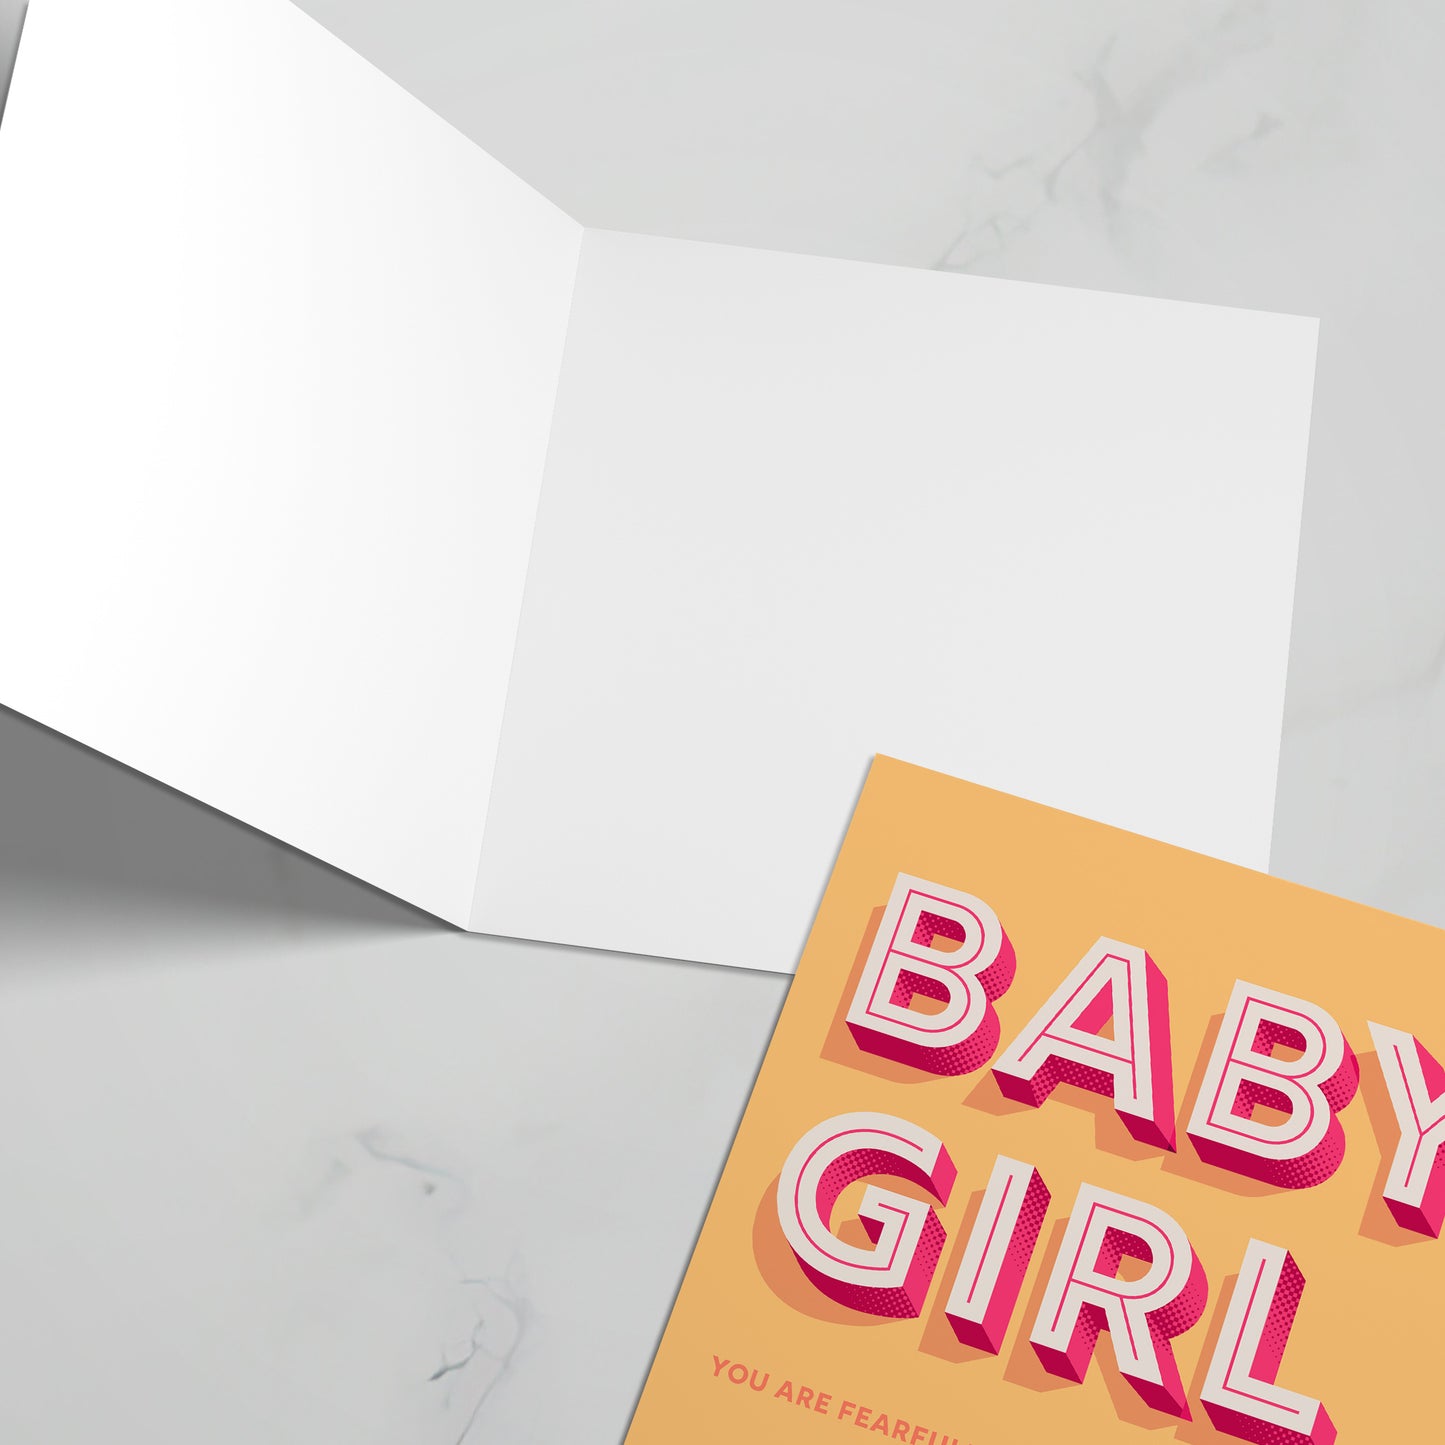 Baby Girl greeting card with bible verse